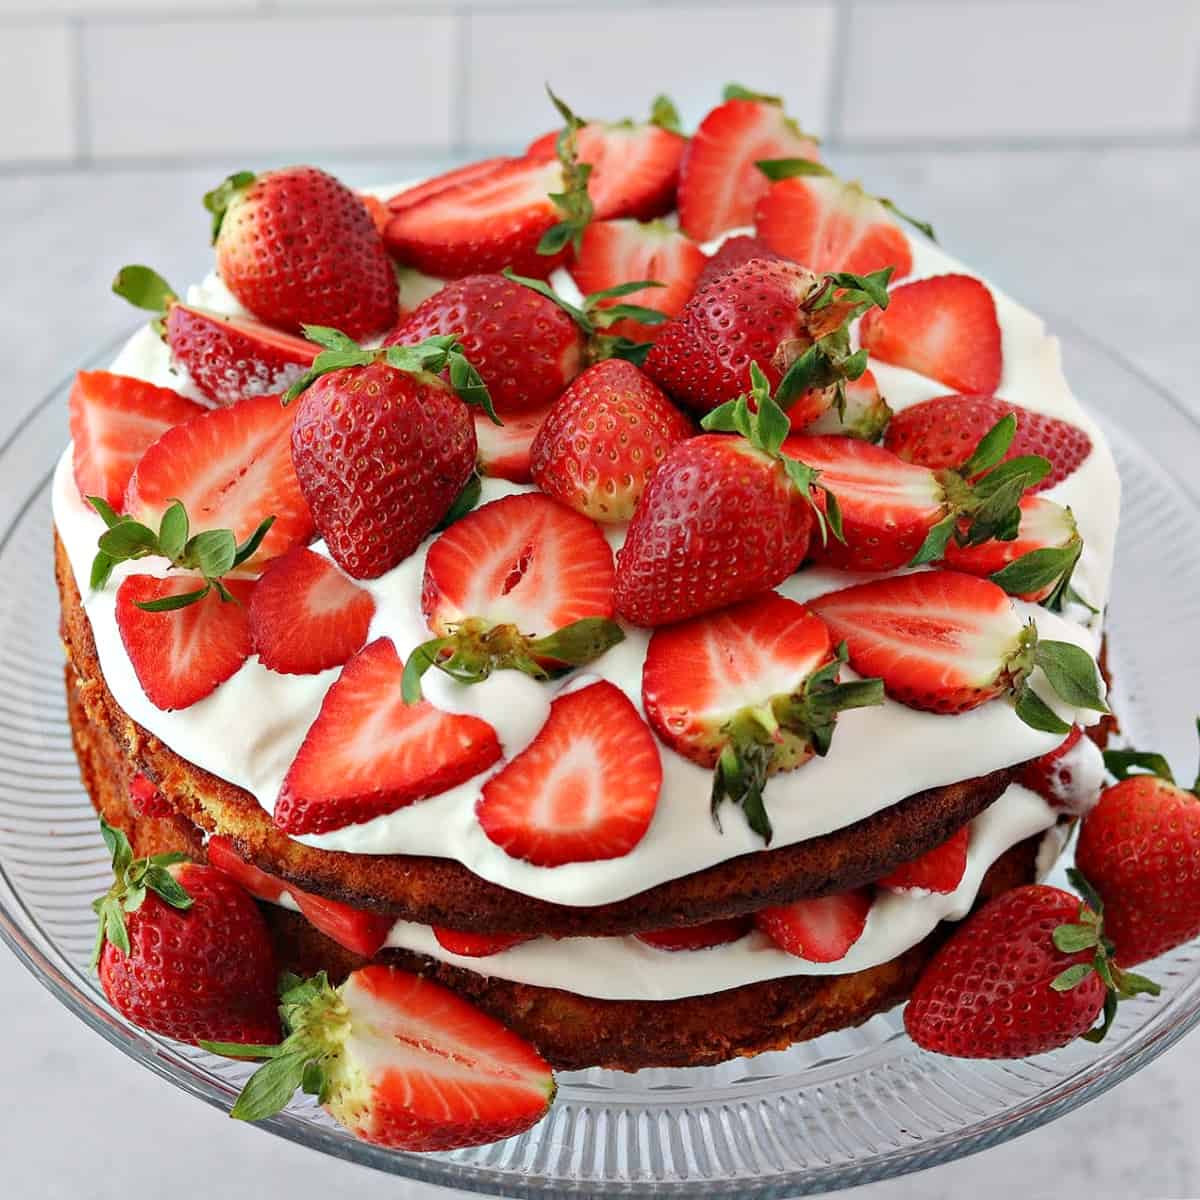 double layer low carb strawberry shortcake on a cake stand